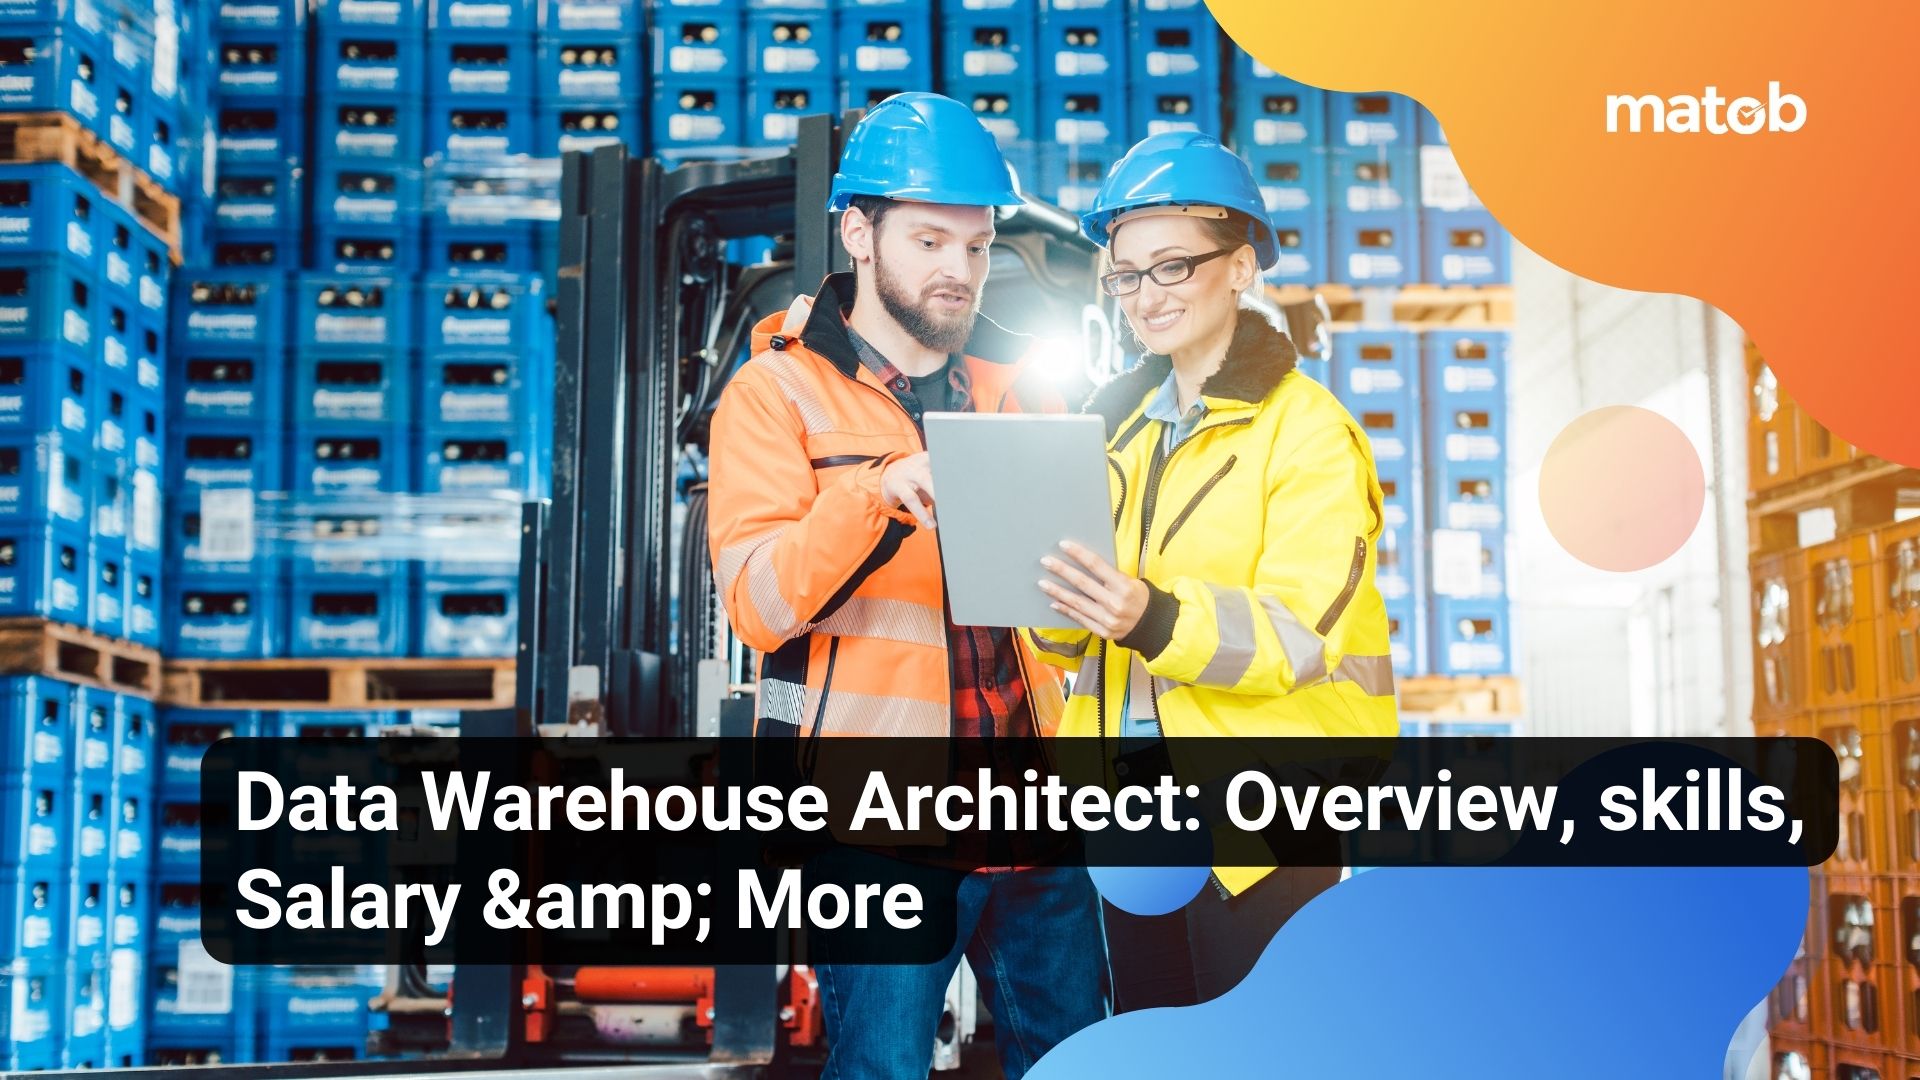 Data Warehouse Architect: Overview, skills, Salary & More